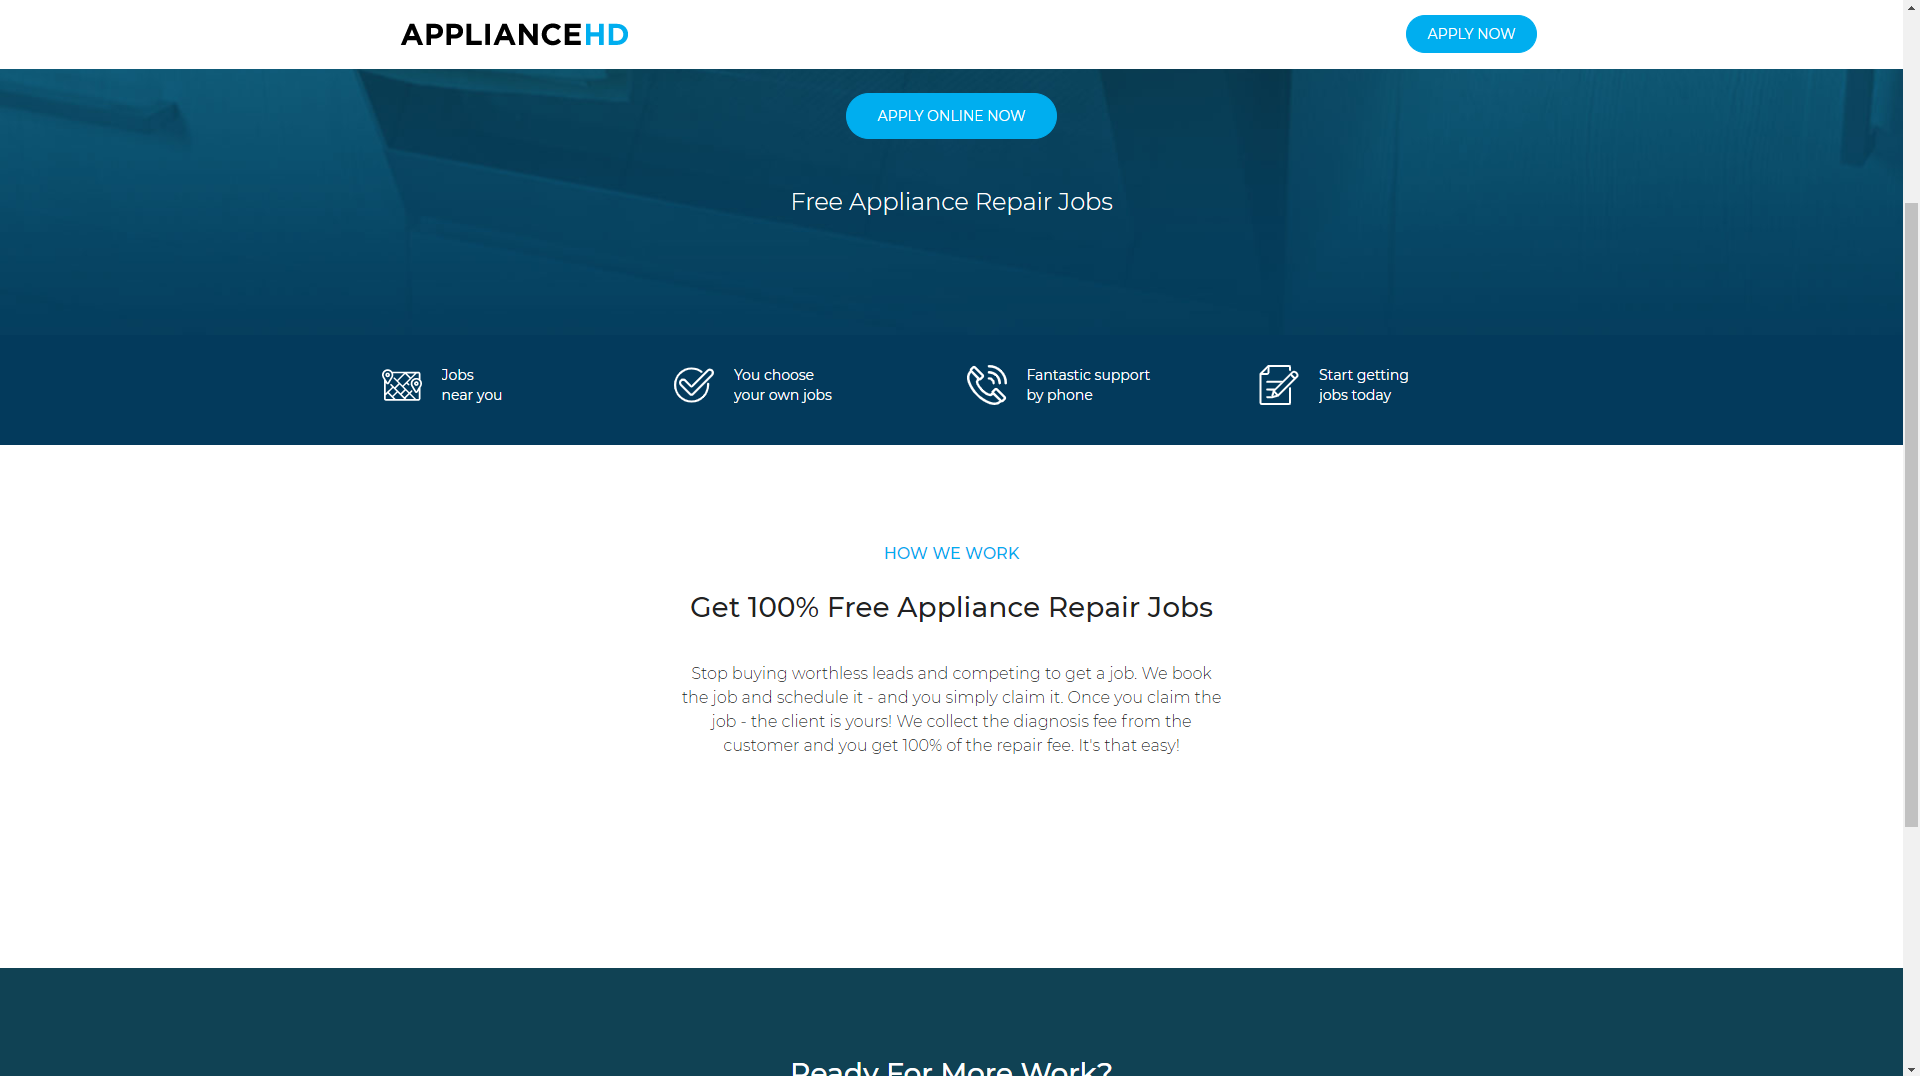 Appliance HD Home Page